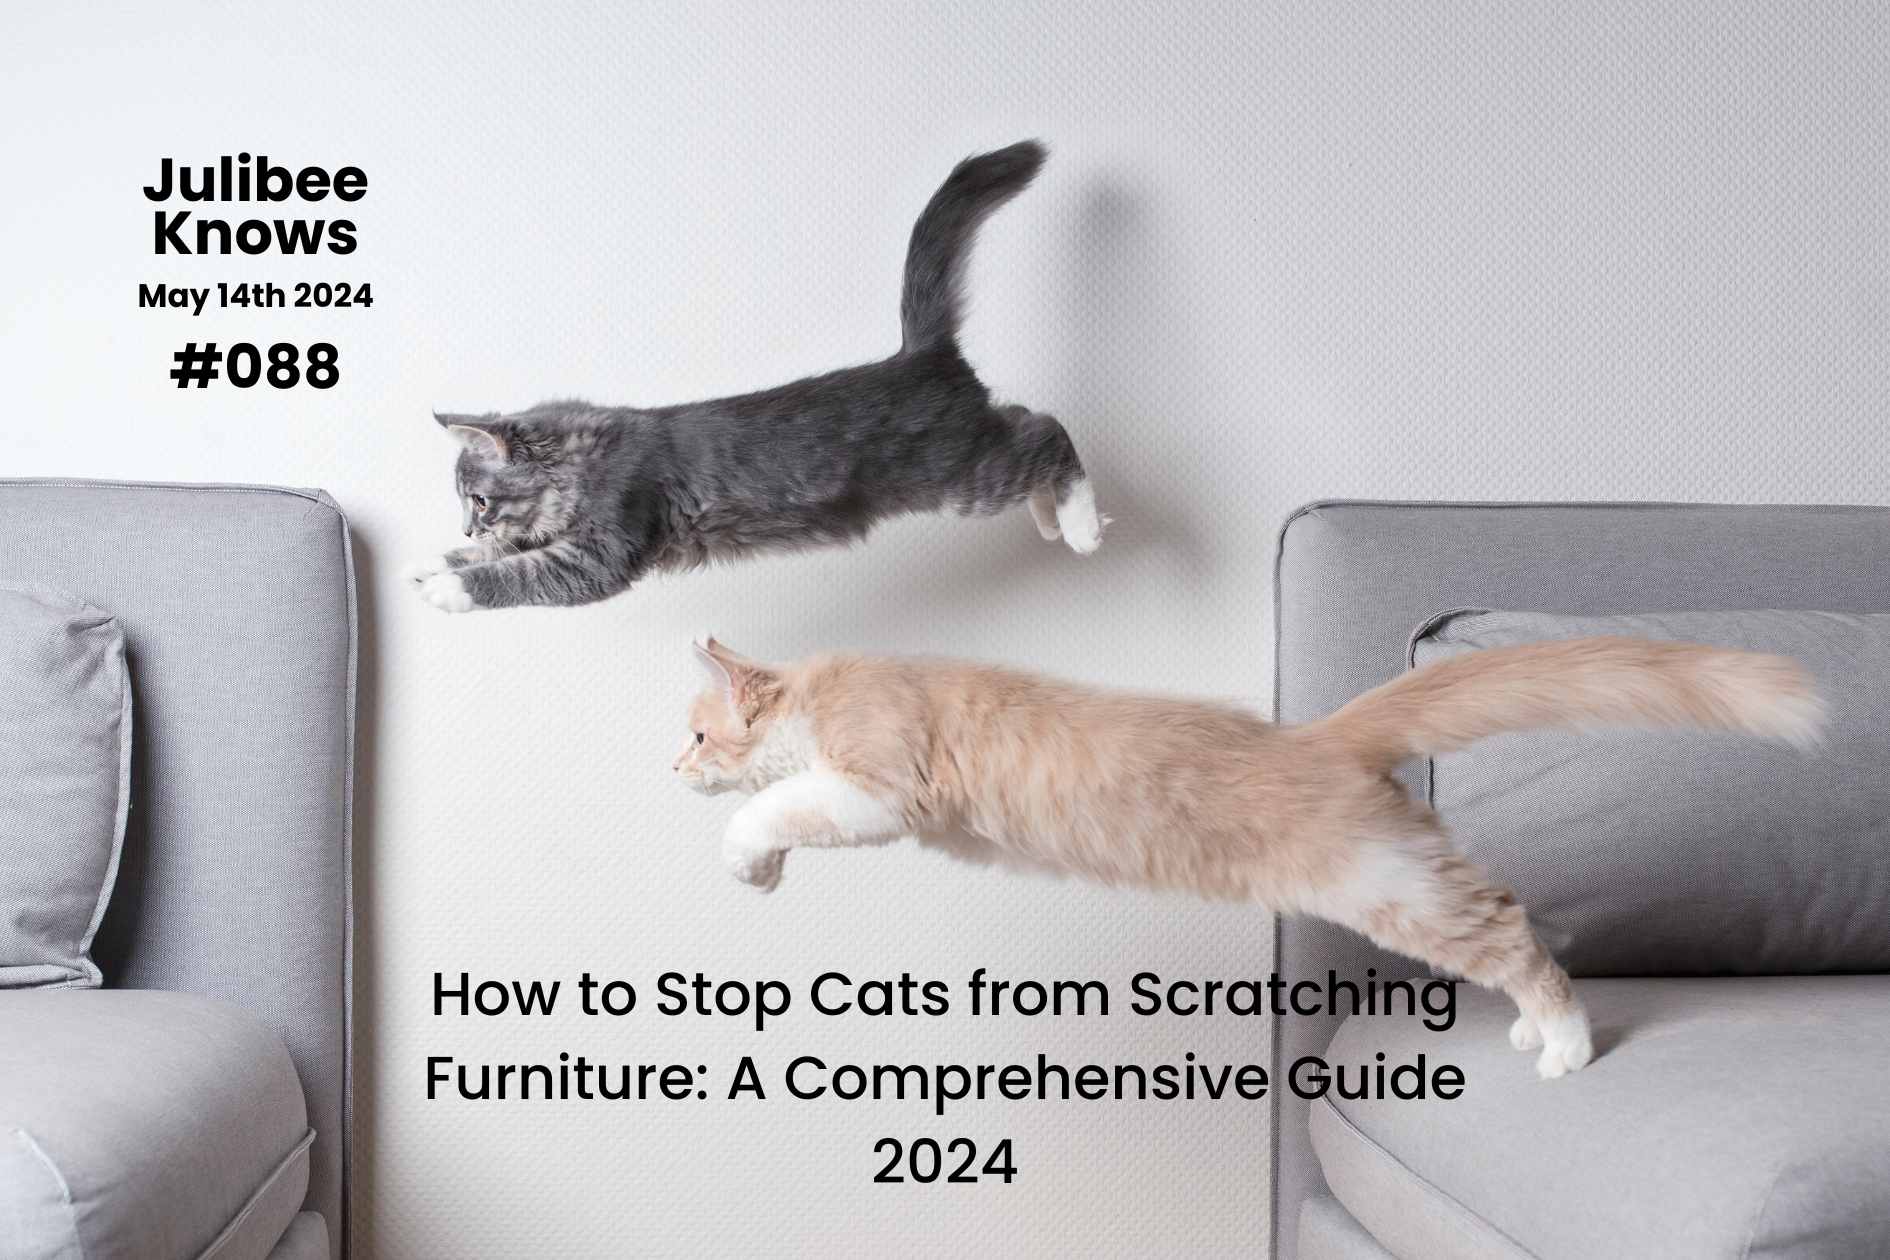 How to Stop Cats from Scratching Furniture: A Comprehensive Guide 2024